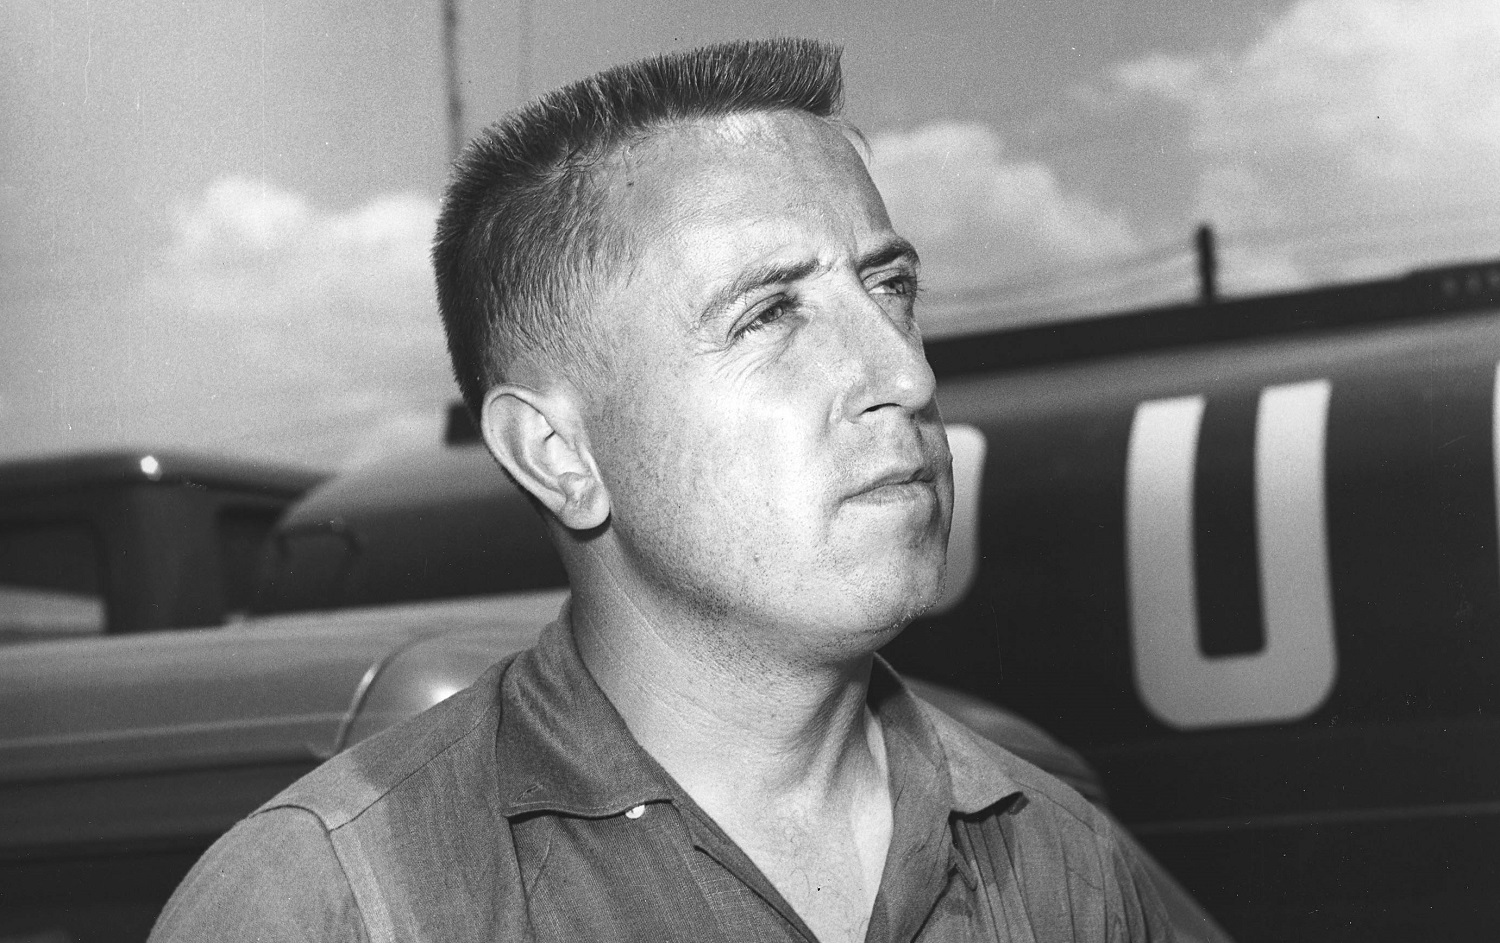 Rex White entered 233 NASCAR Cup races from 1956 through 1964, scoring 28 wins and the 1960 Cup championship. | ISC Images & Archives via Getty Images